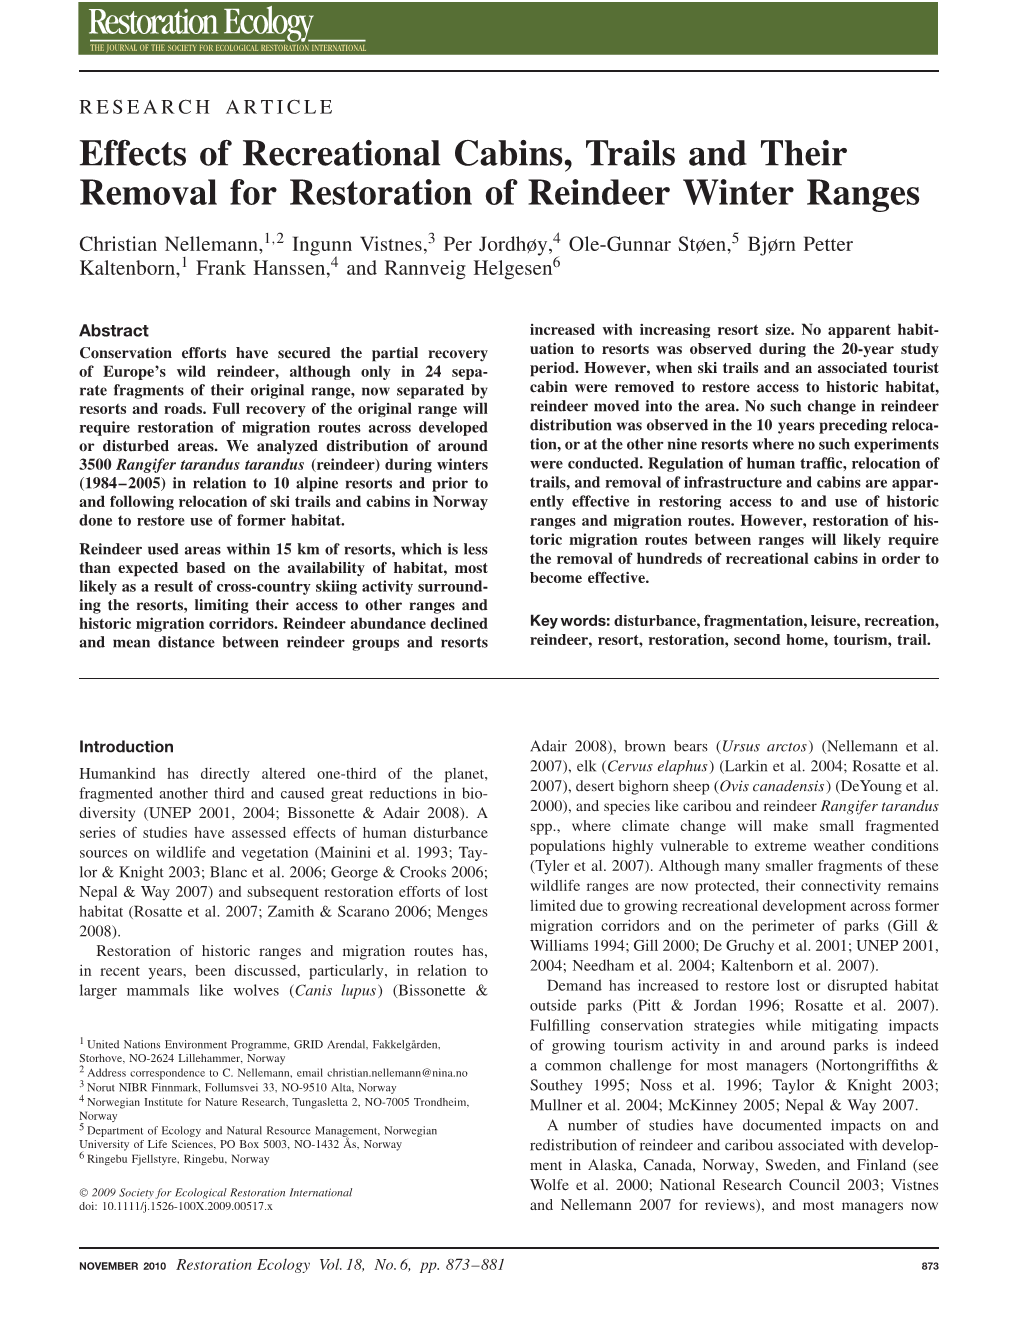 Effects of Recreational Cabins, Trails and Their Removal for Restoration of Reindeer Winter Ranges